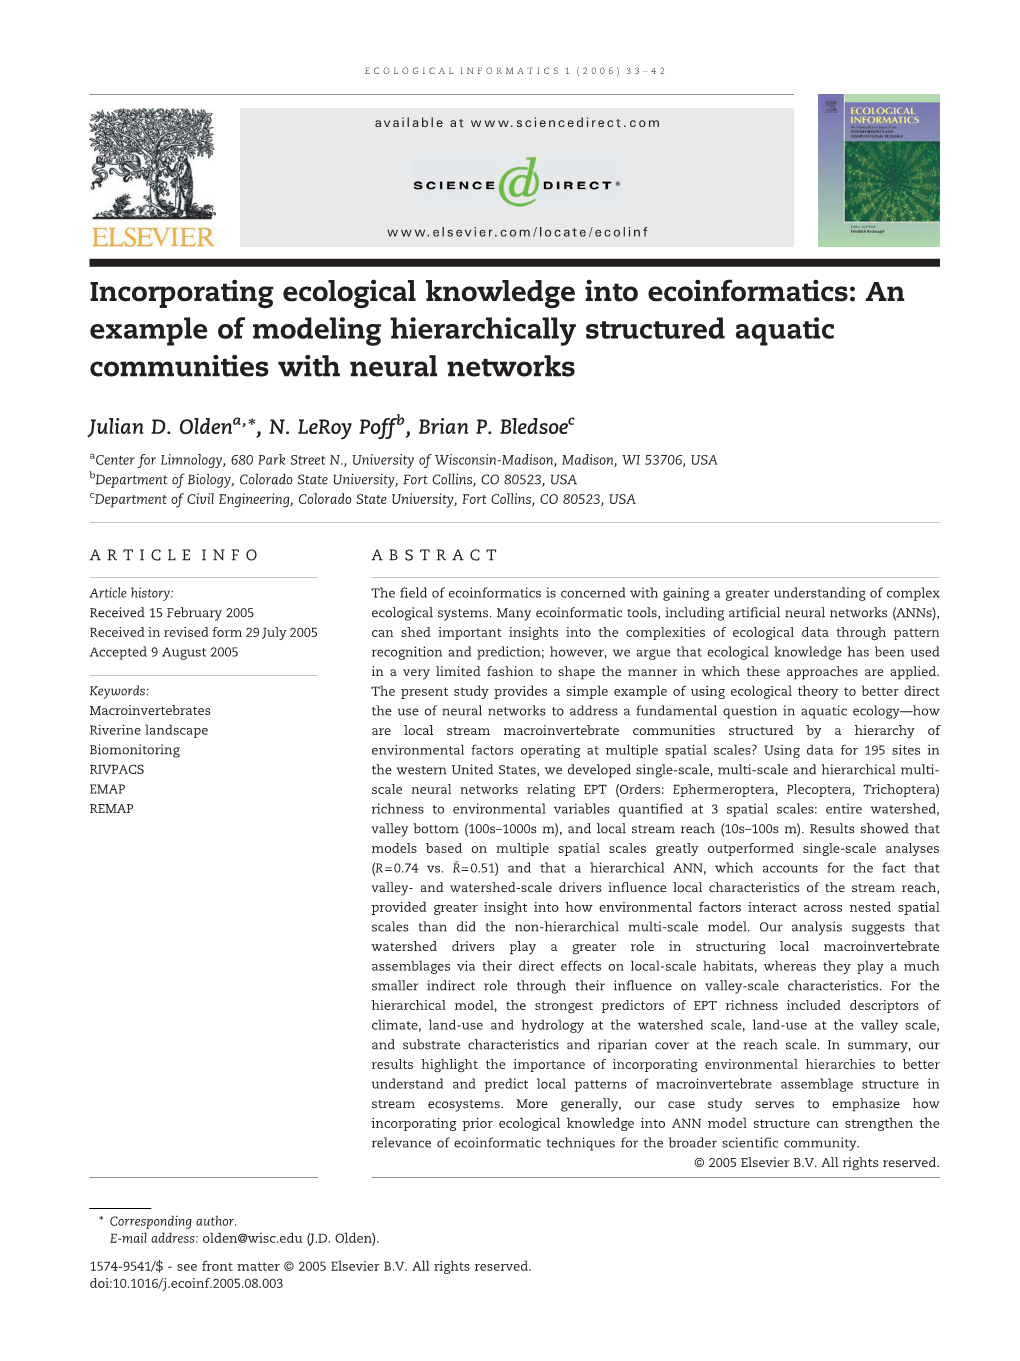 Incorporating Ecological Knowledge Into Ecoinformatics: an Example of Modeling Hierarchically Structured Aquatic Communities with Neural Networks